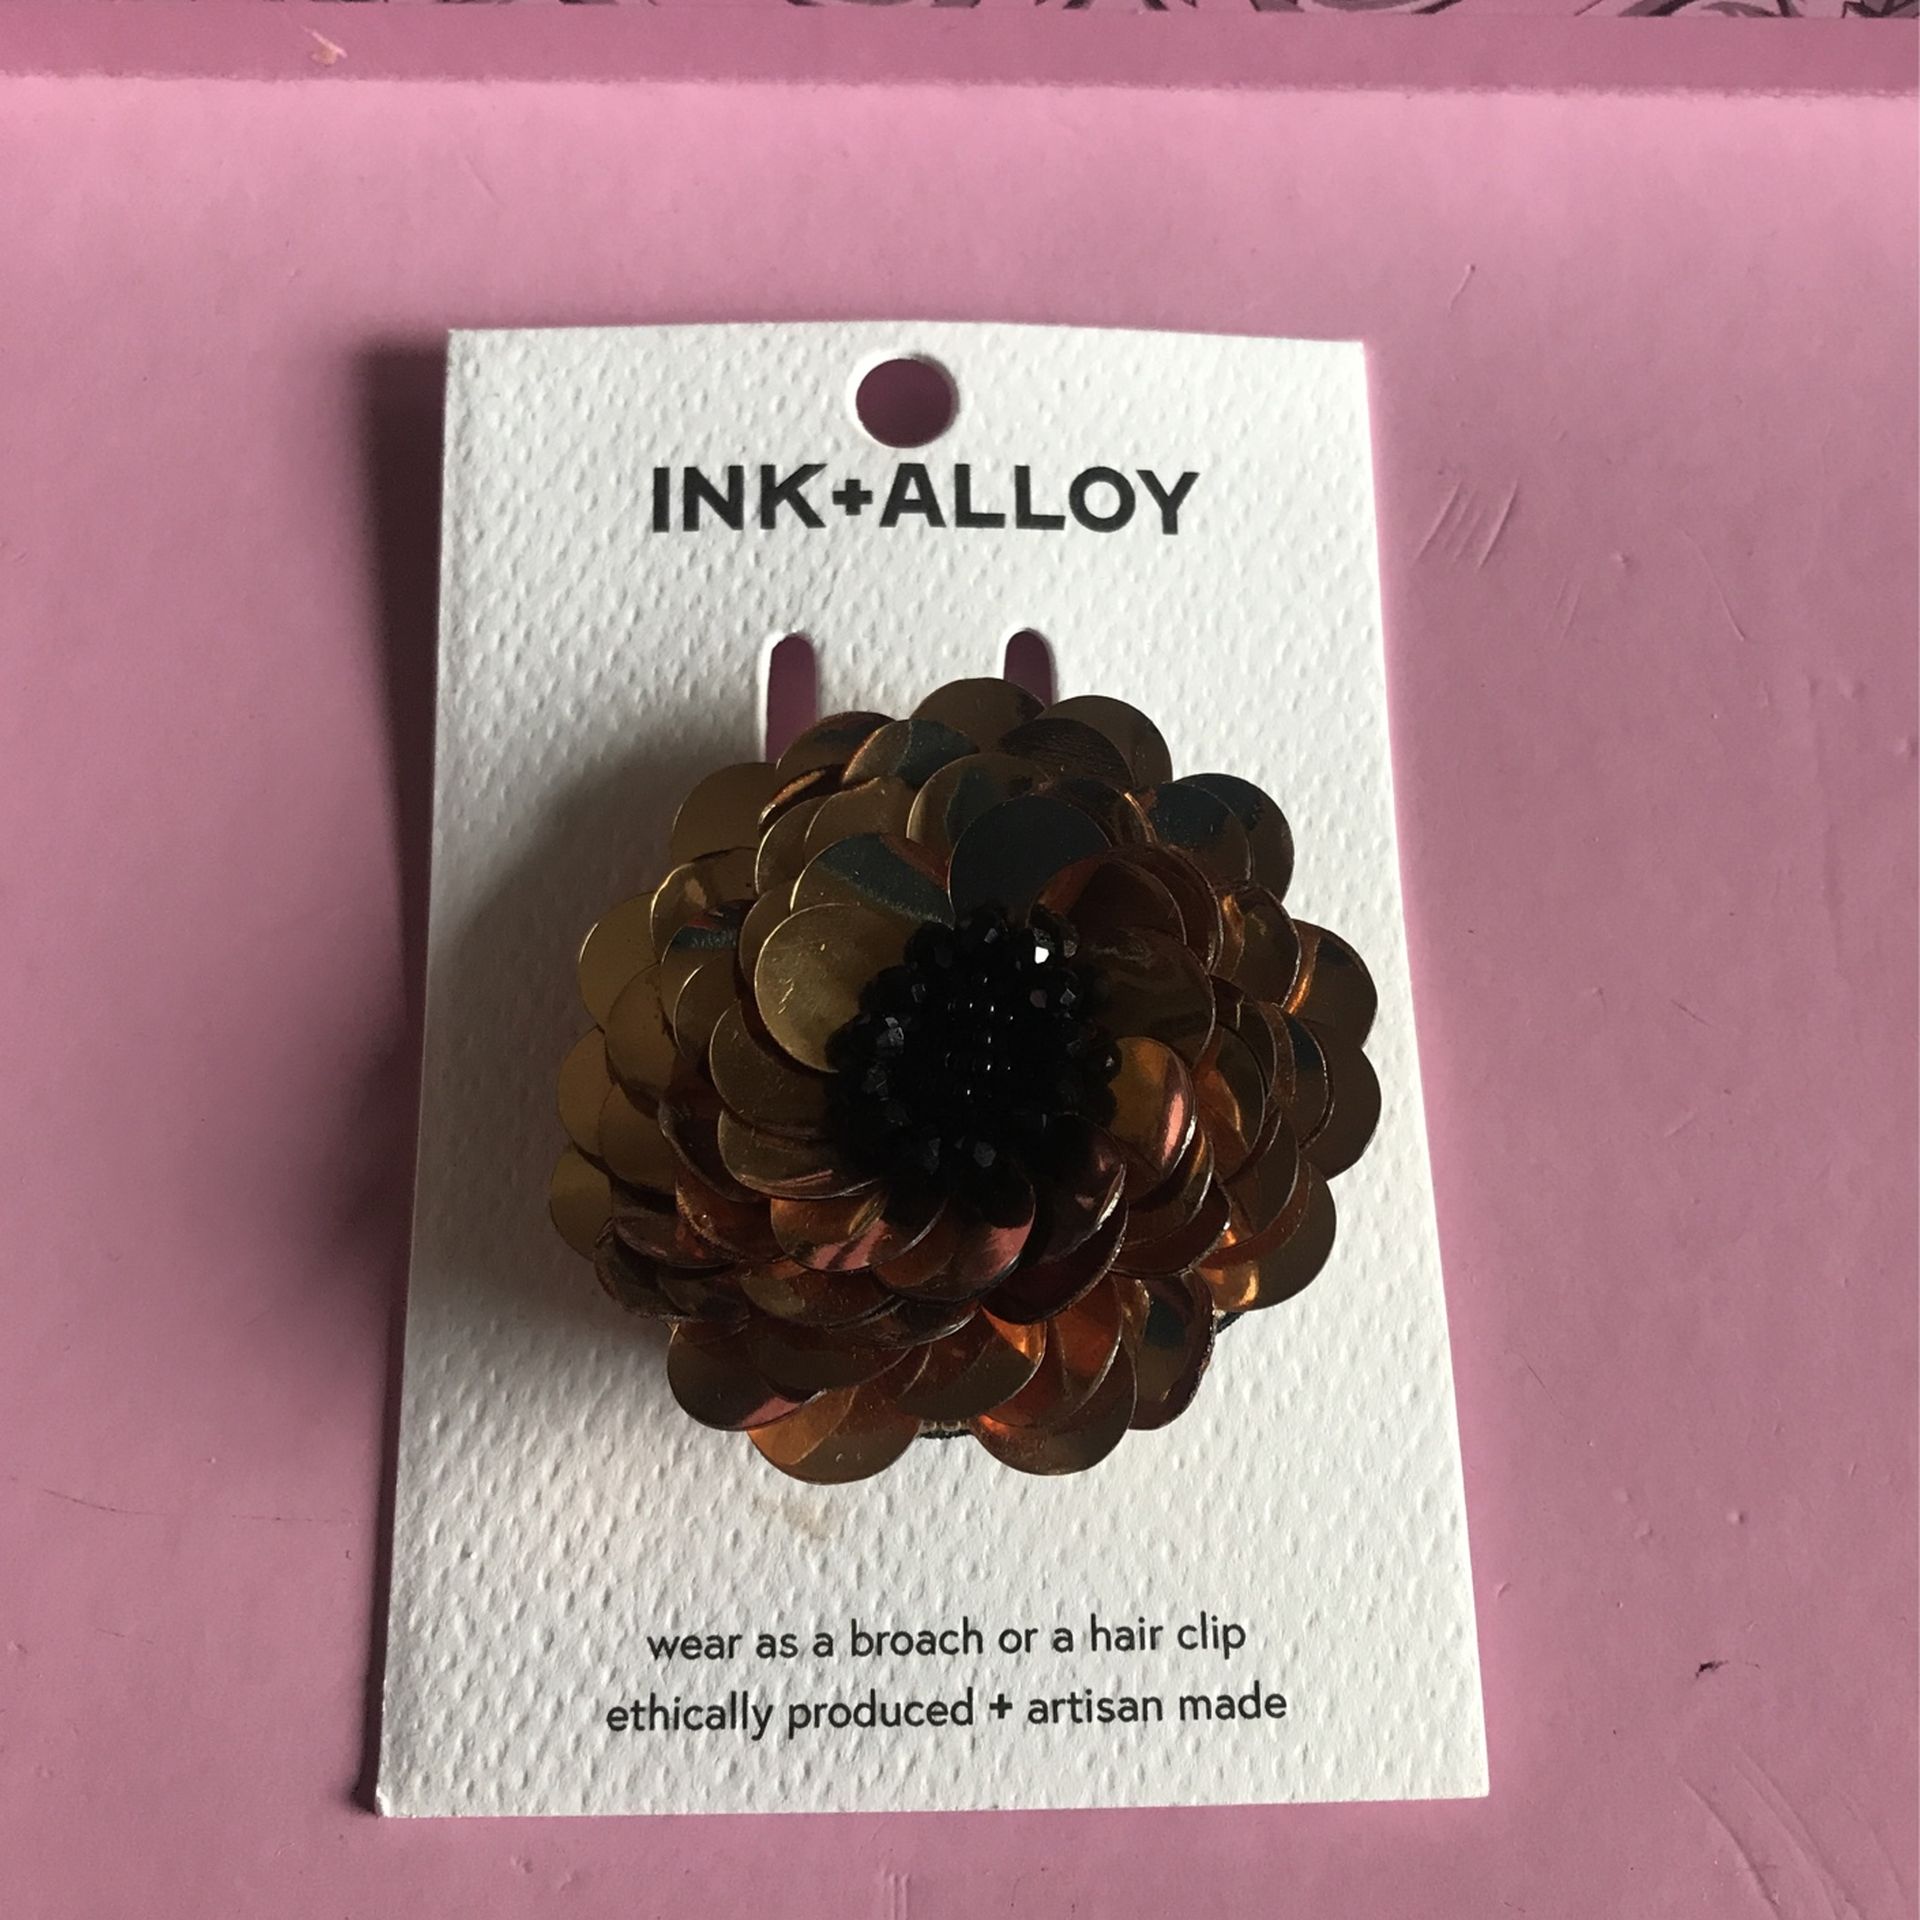 New Ink+Alloy Gold Flower Broach Or a Hair Clip Ethically Produced Artisan Made New